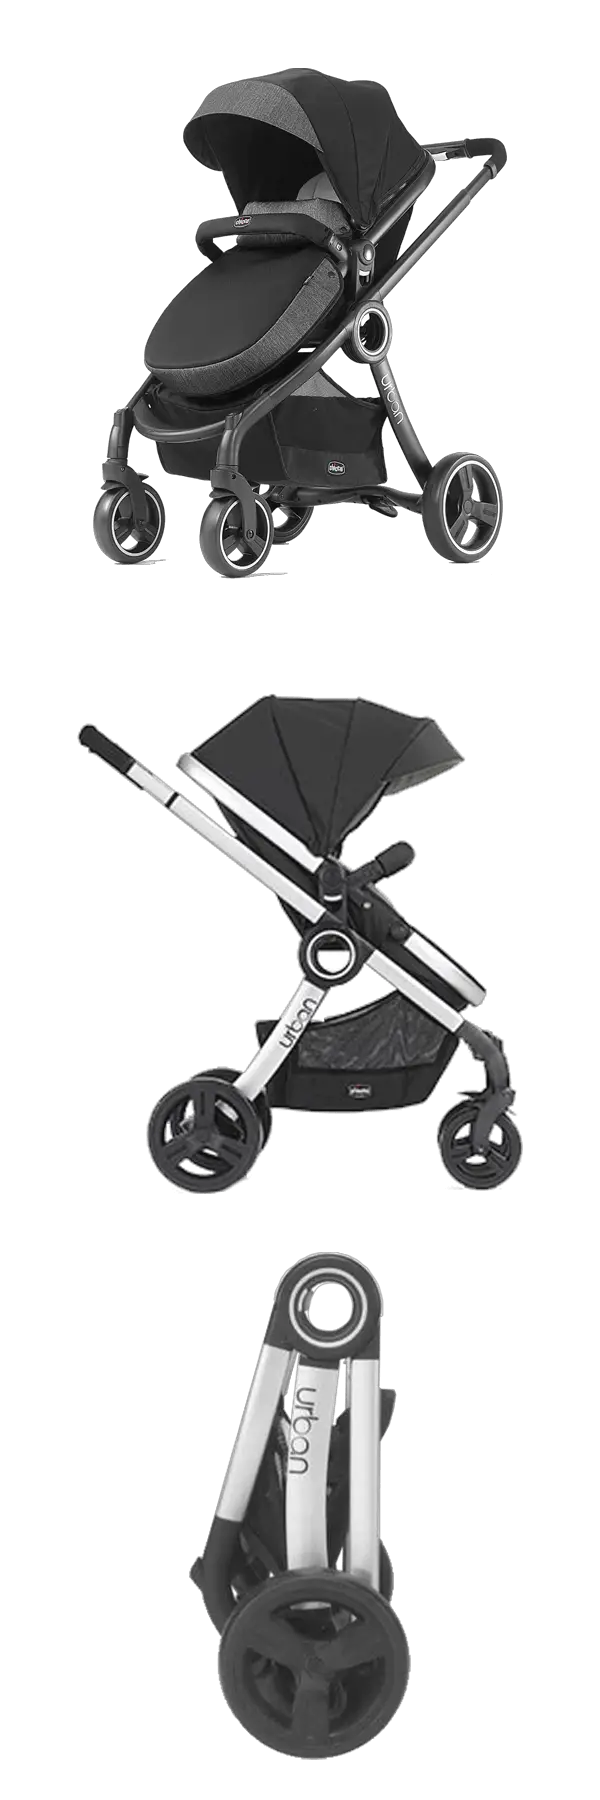 Chicco Urban Stroller configurations